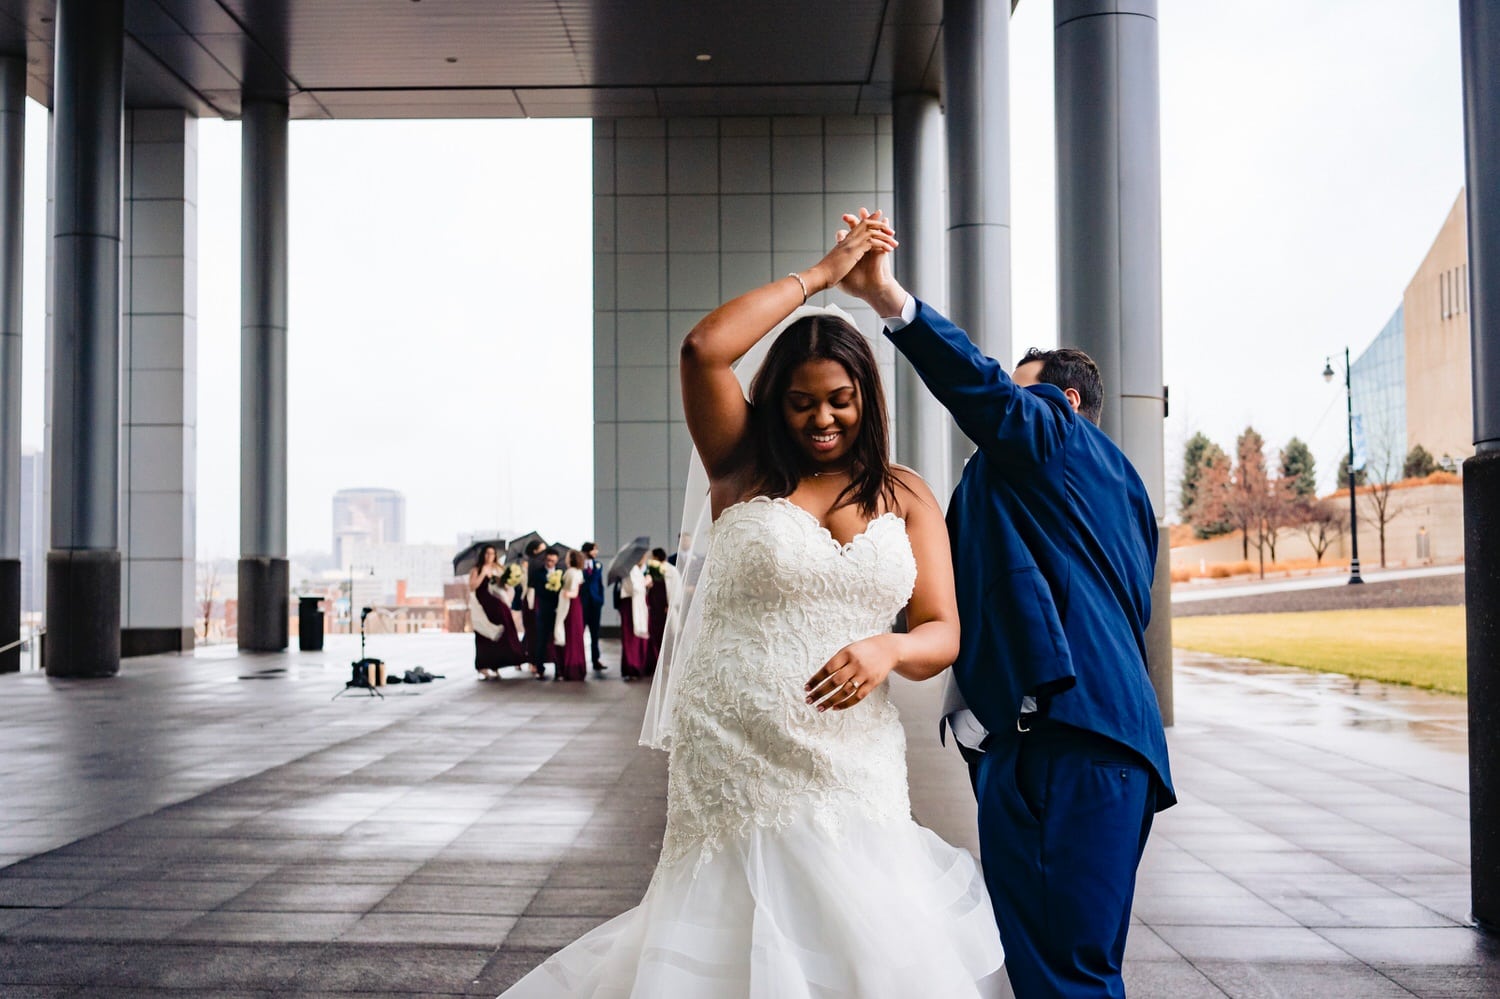 A colorful, candid picture of a bride and groom dancing, their wedding party visible in the background on a rainy winter wedding day in downtown Kansas City. 